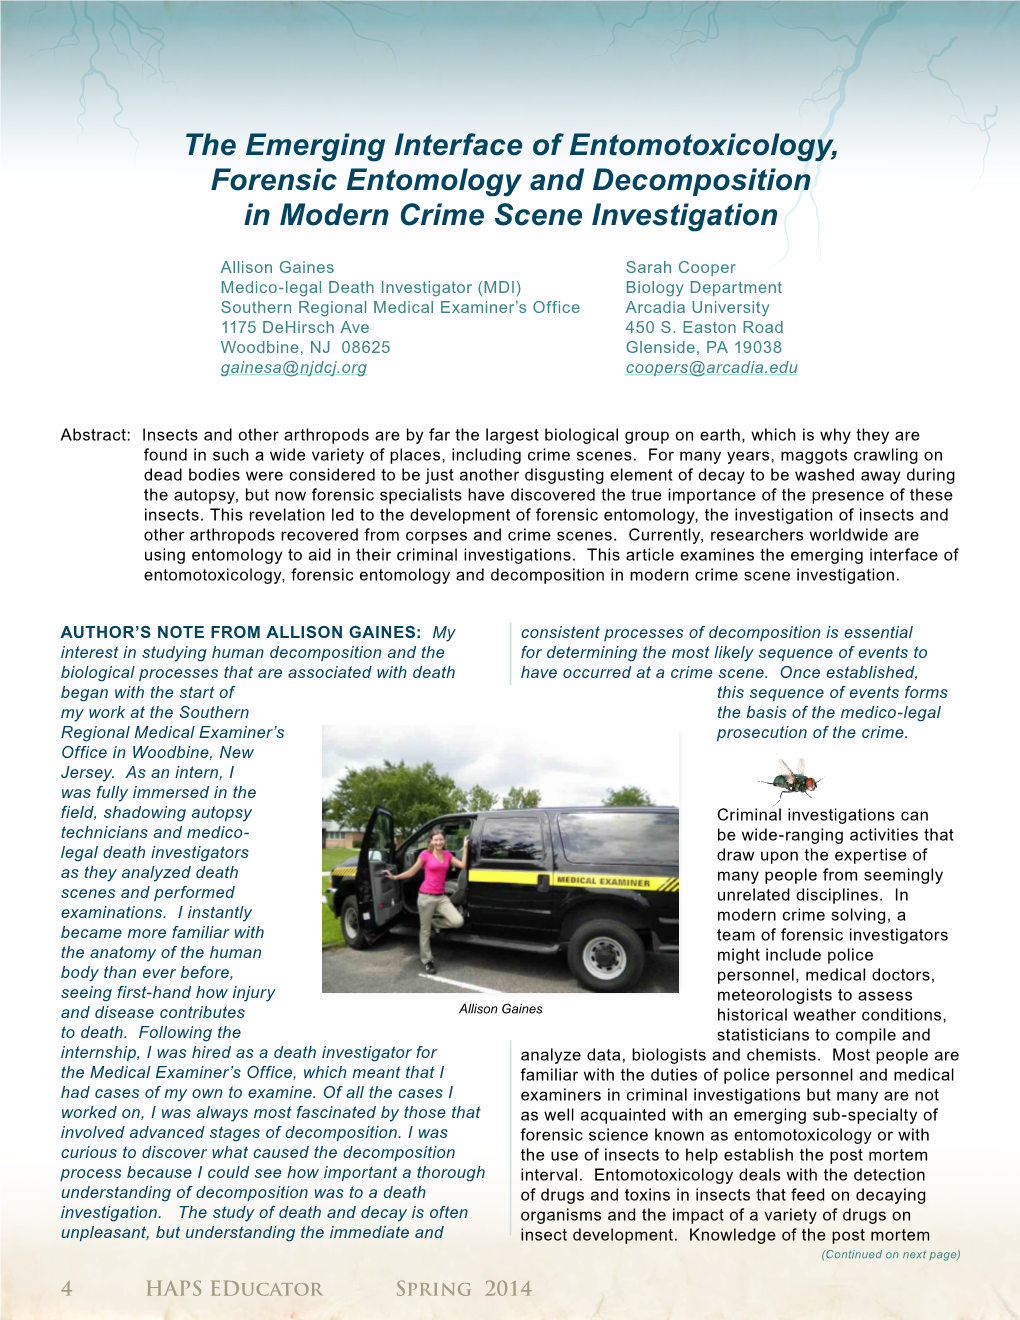 The Emerging Interface of Entomotoxicology, Forensic Entomology and Decomposition in Modern Crime Scene Investigation